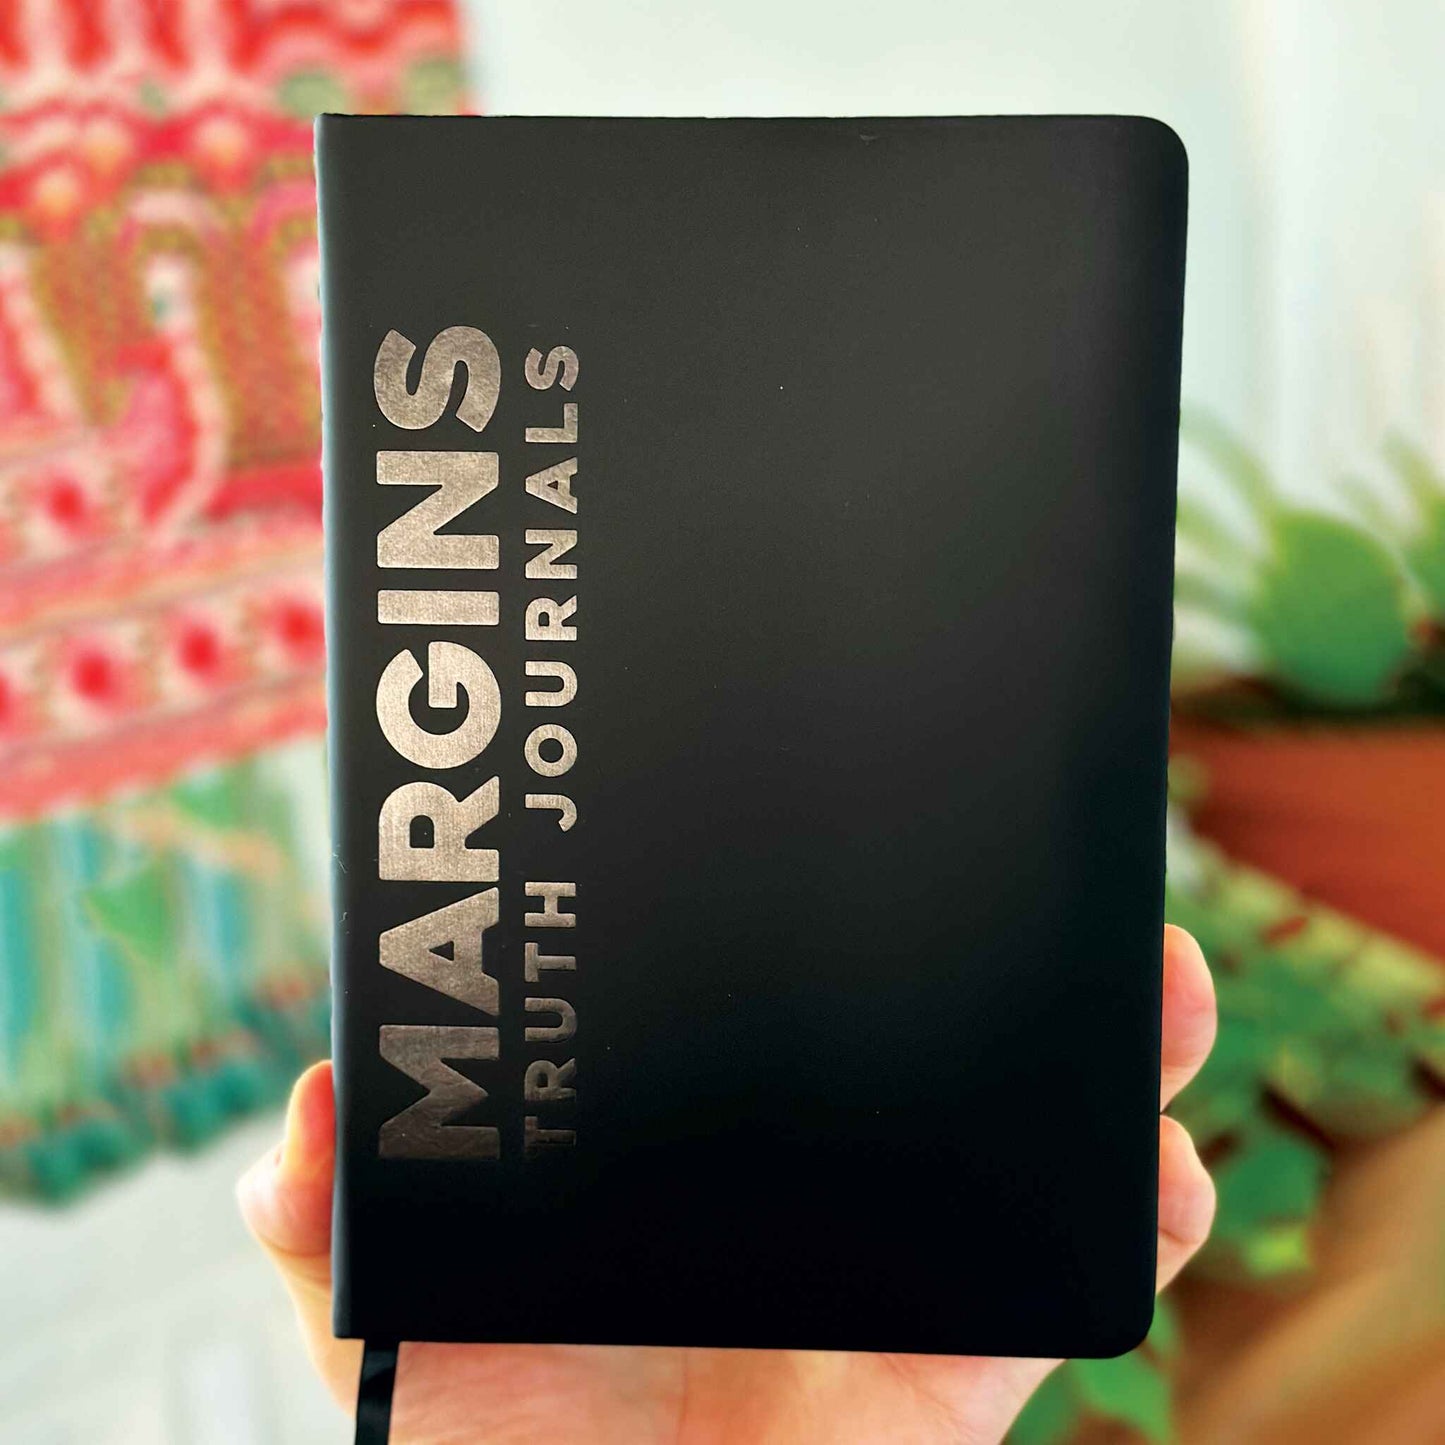 MARGINS - Lined Truth Journal with Encouraging Bible Verses in the Margins